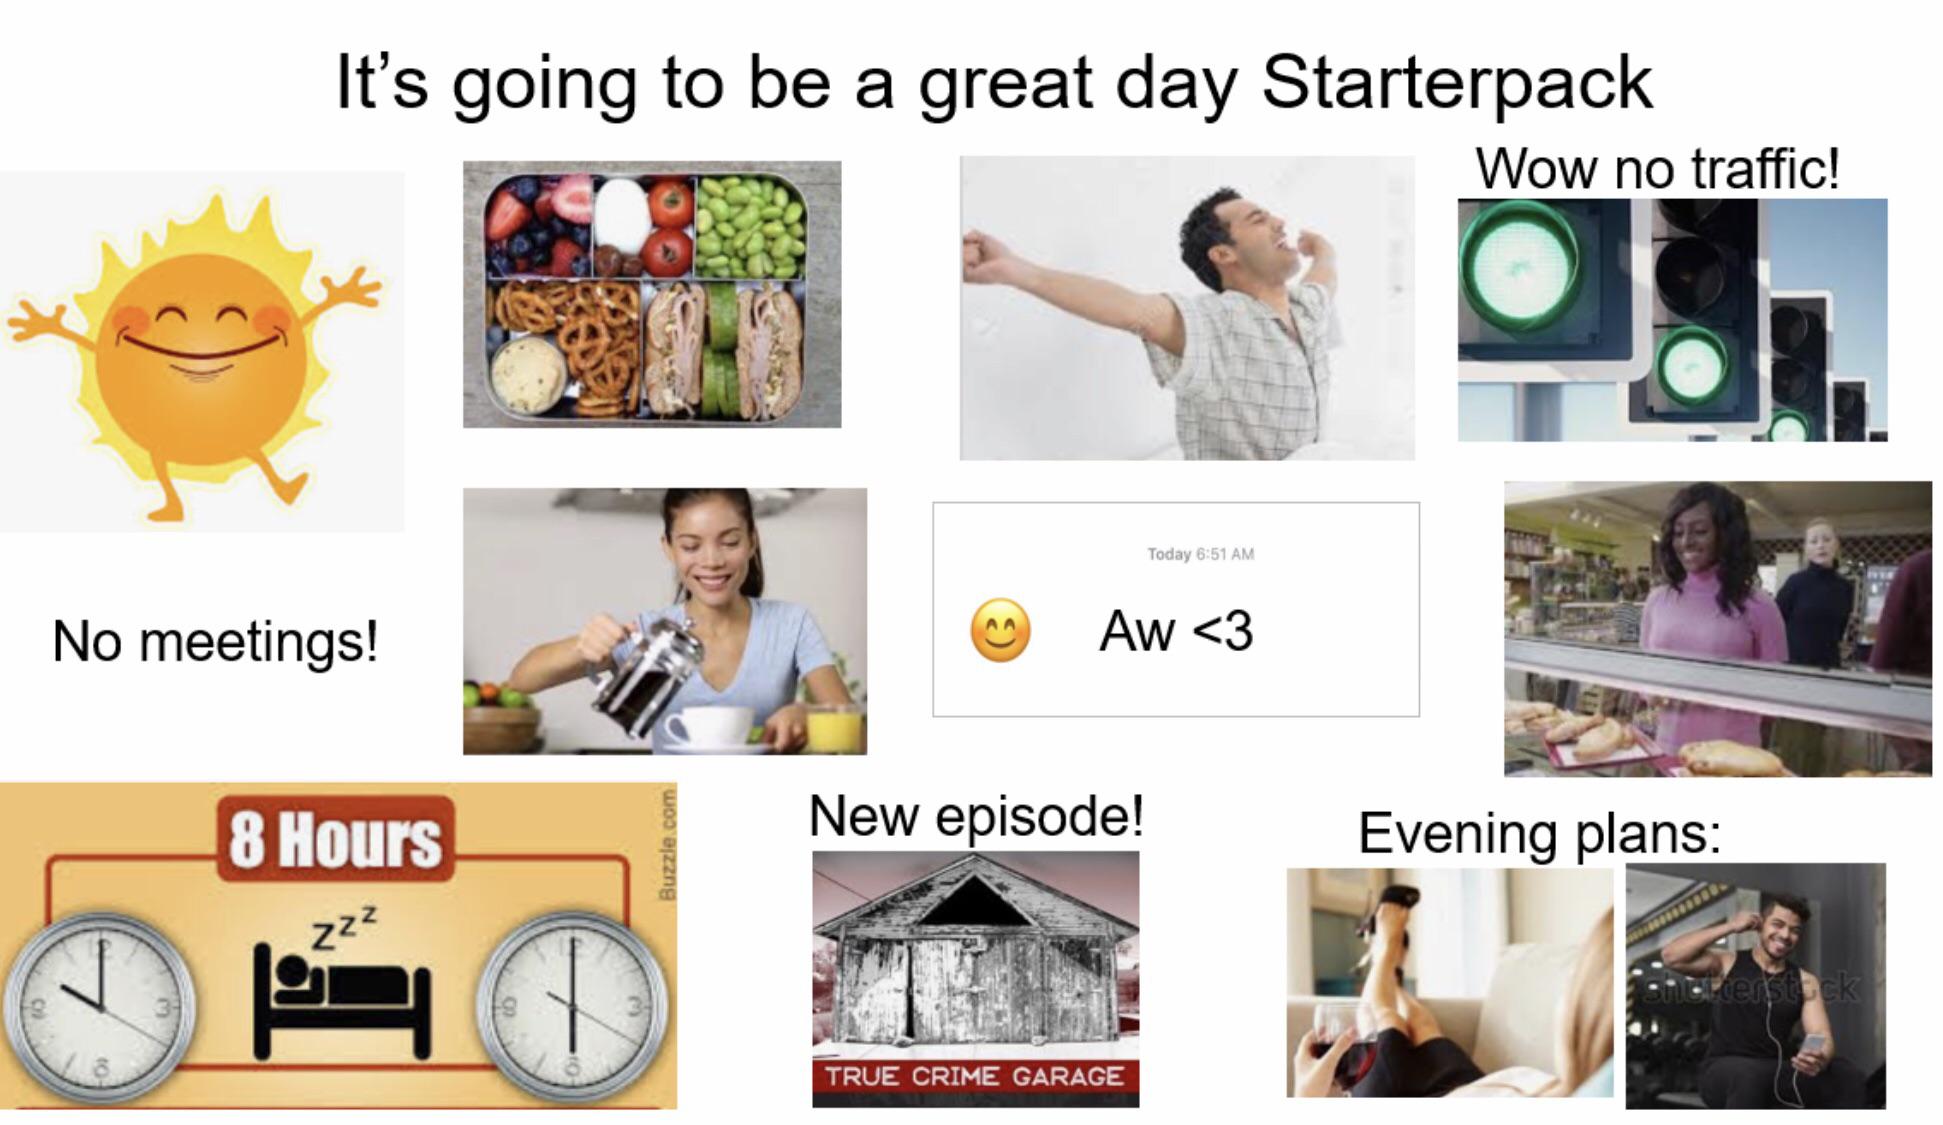 good day starter pack - It's going to be a great day Starterpack Wow no traffic! Today No meetings! Aw